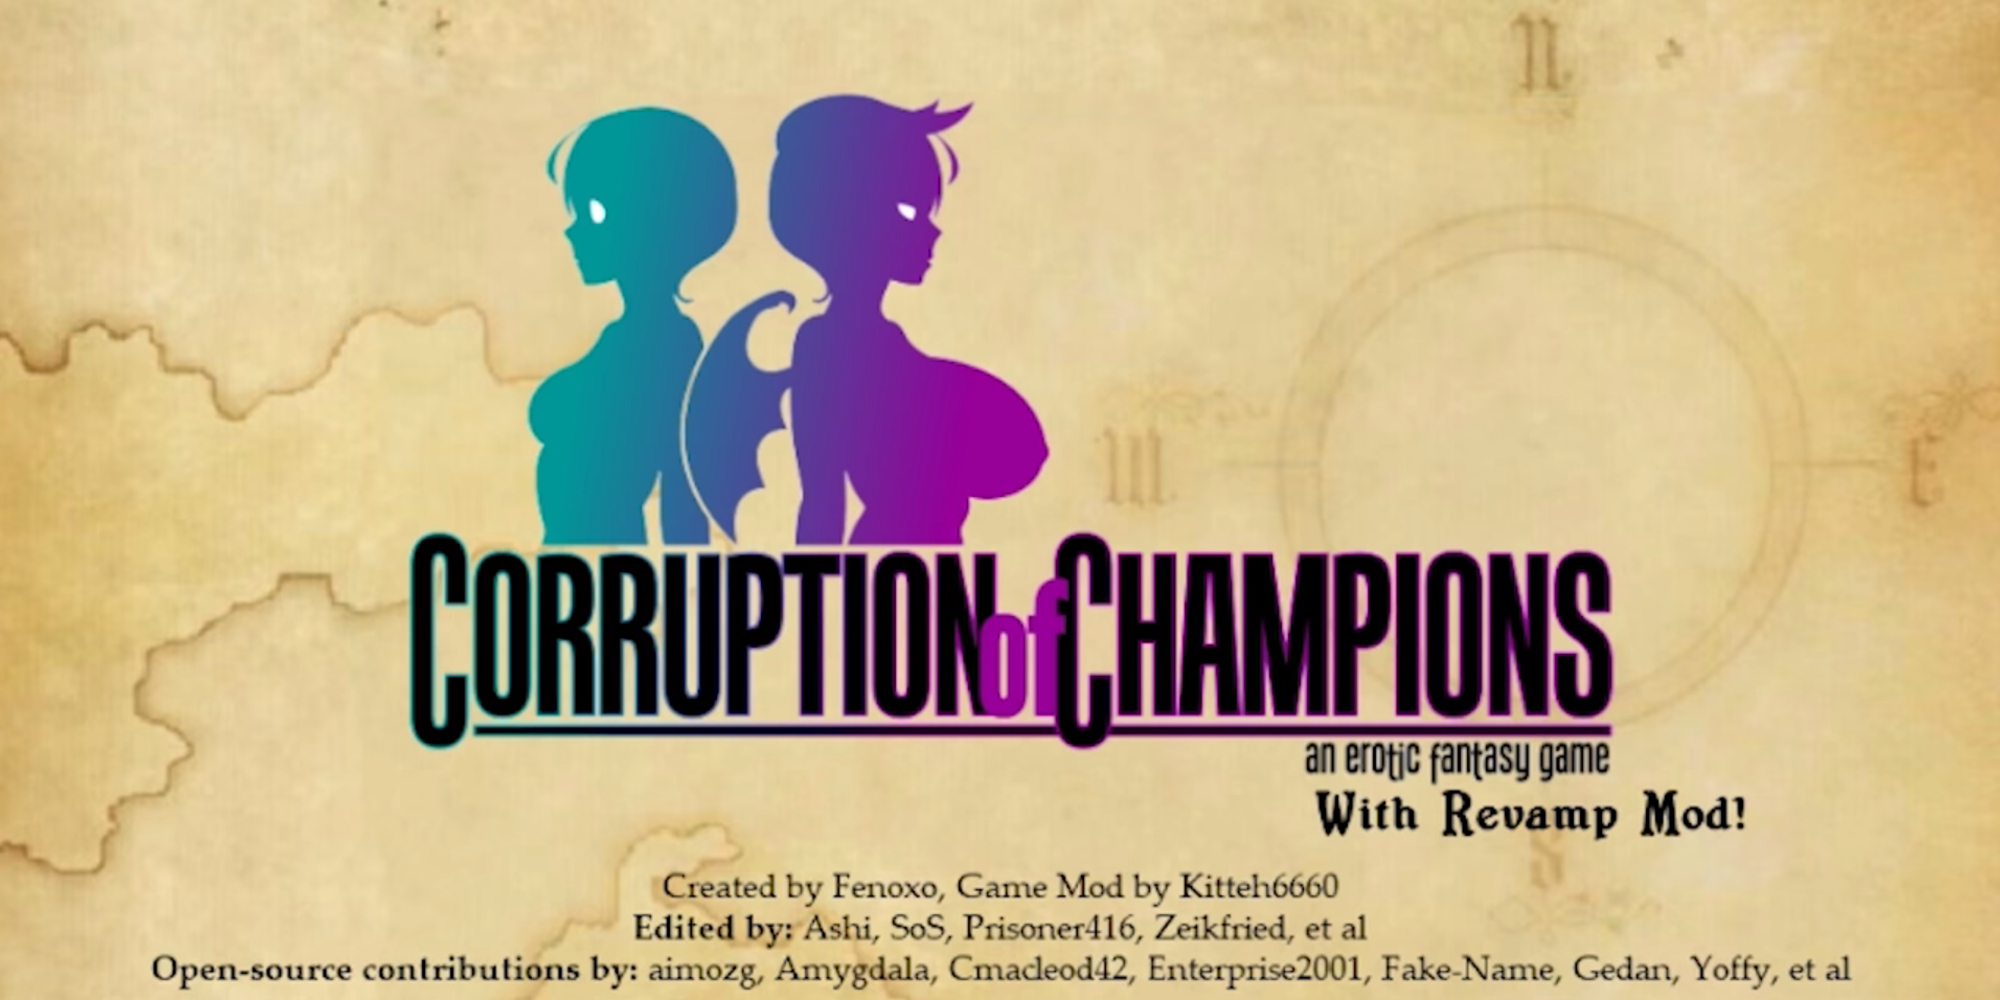 corruption of champions revamp mod guide